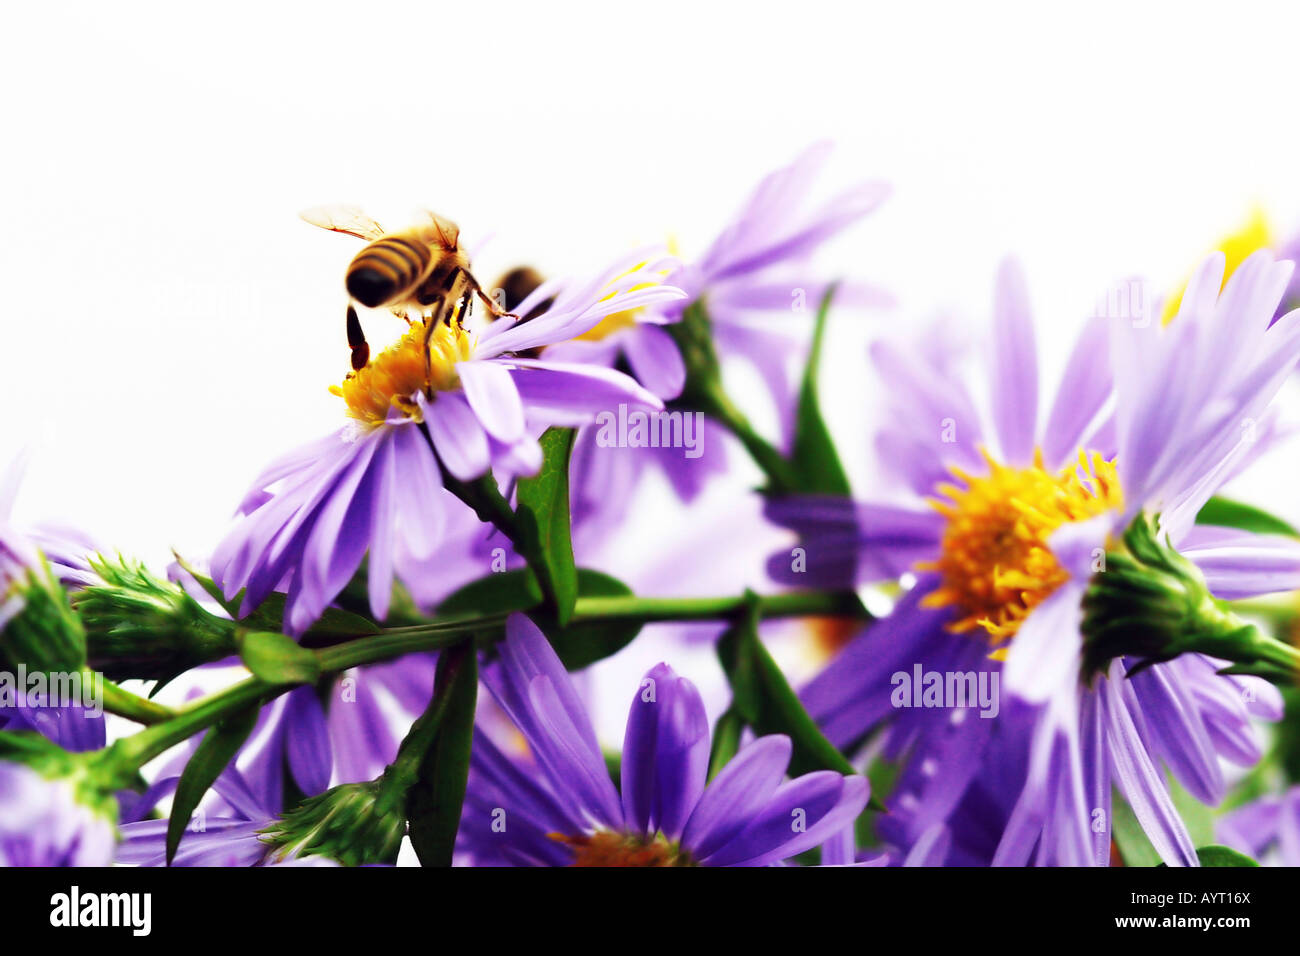 Bee (Apiformes) perched in flowers Stock Photo